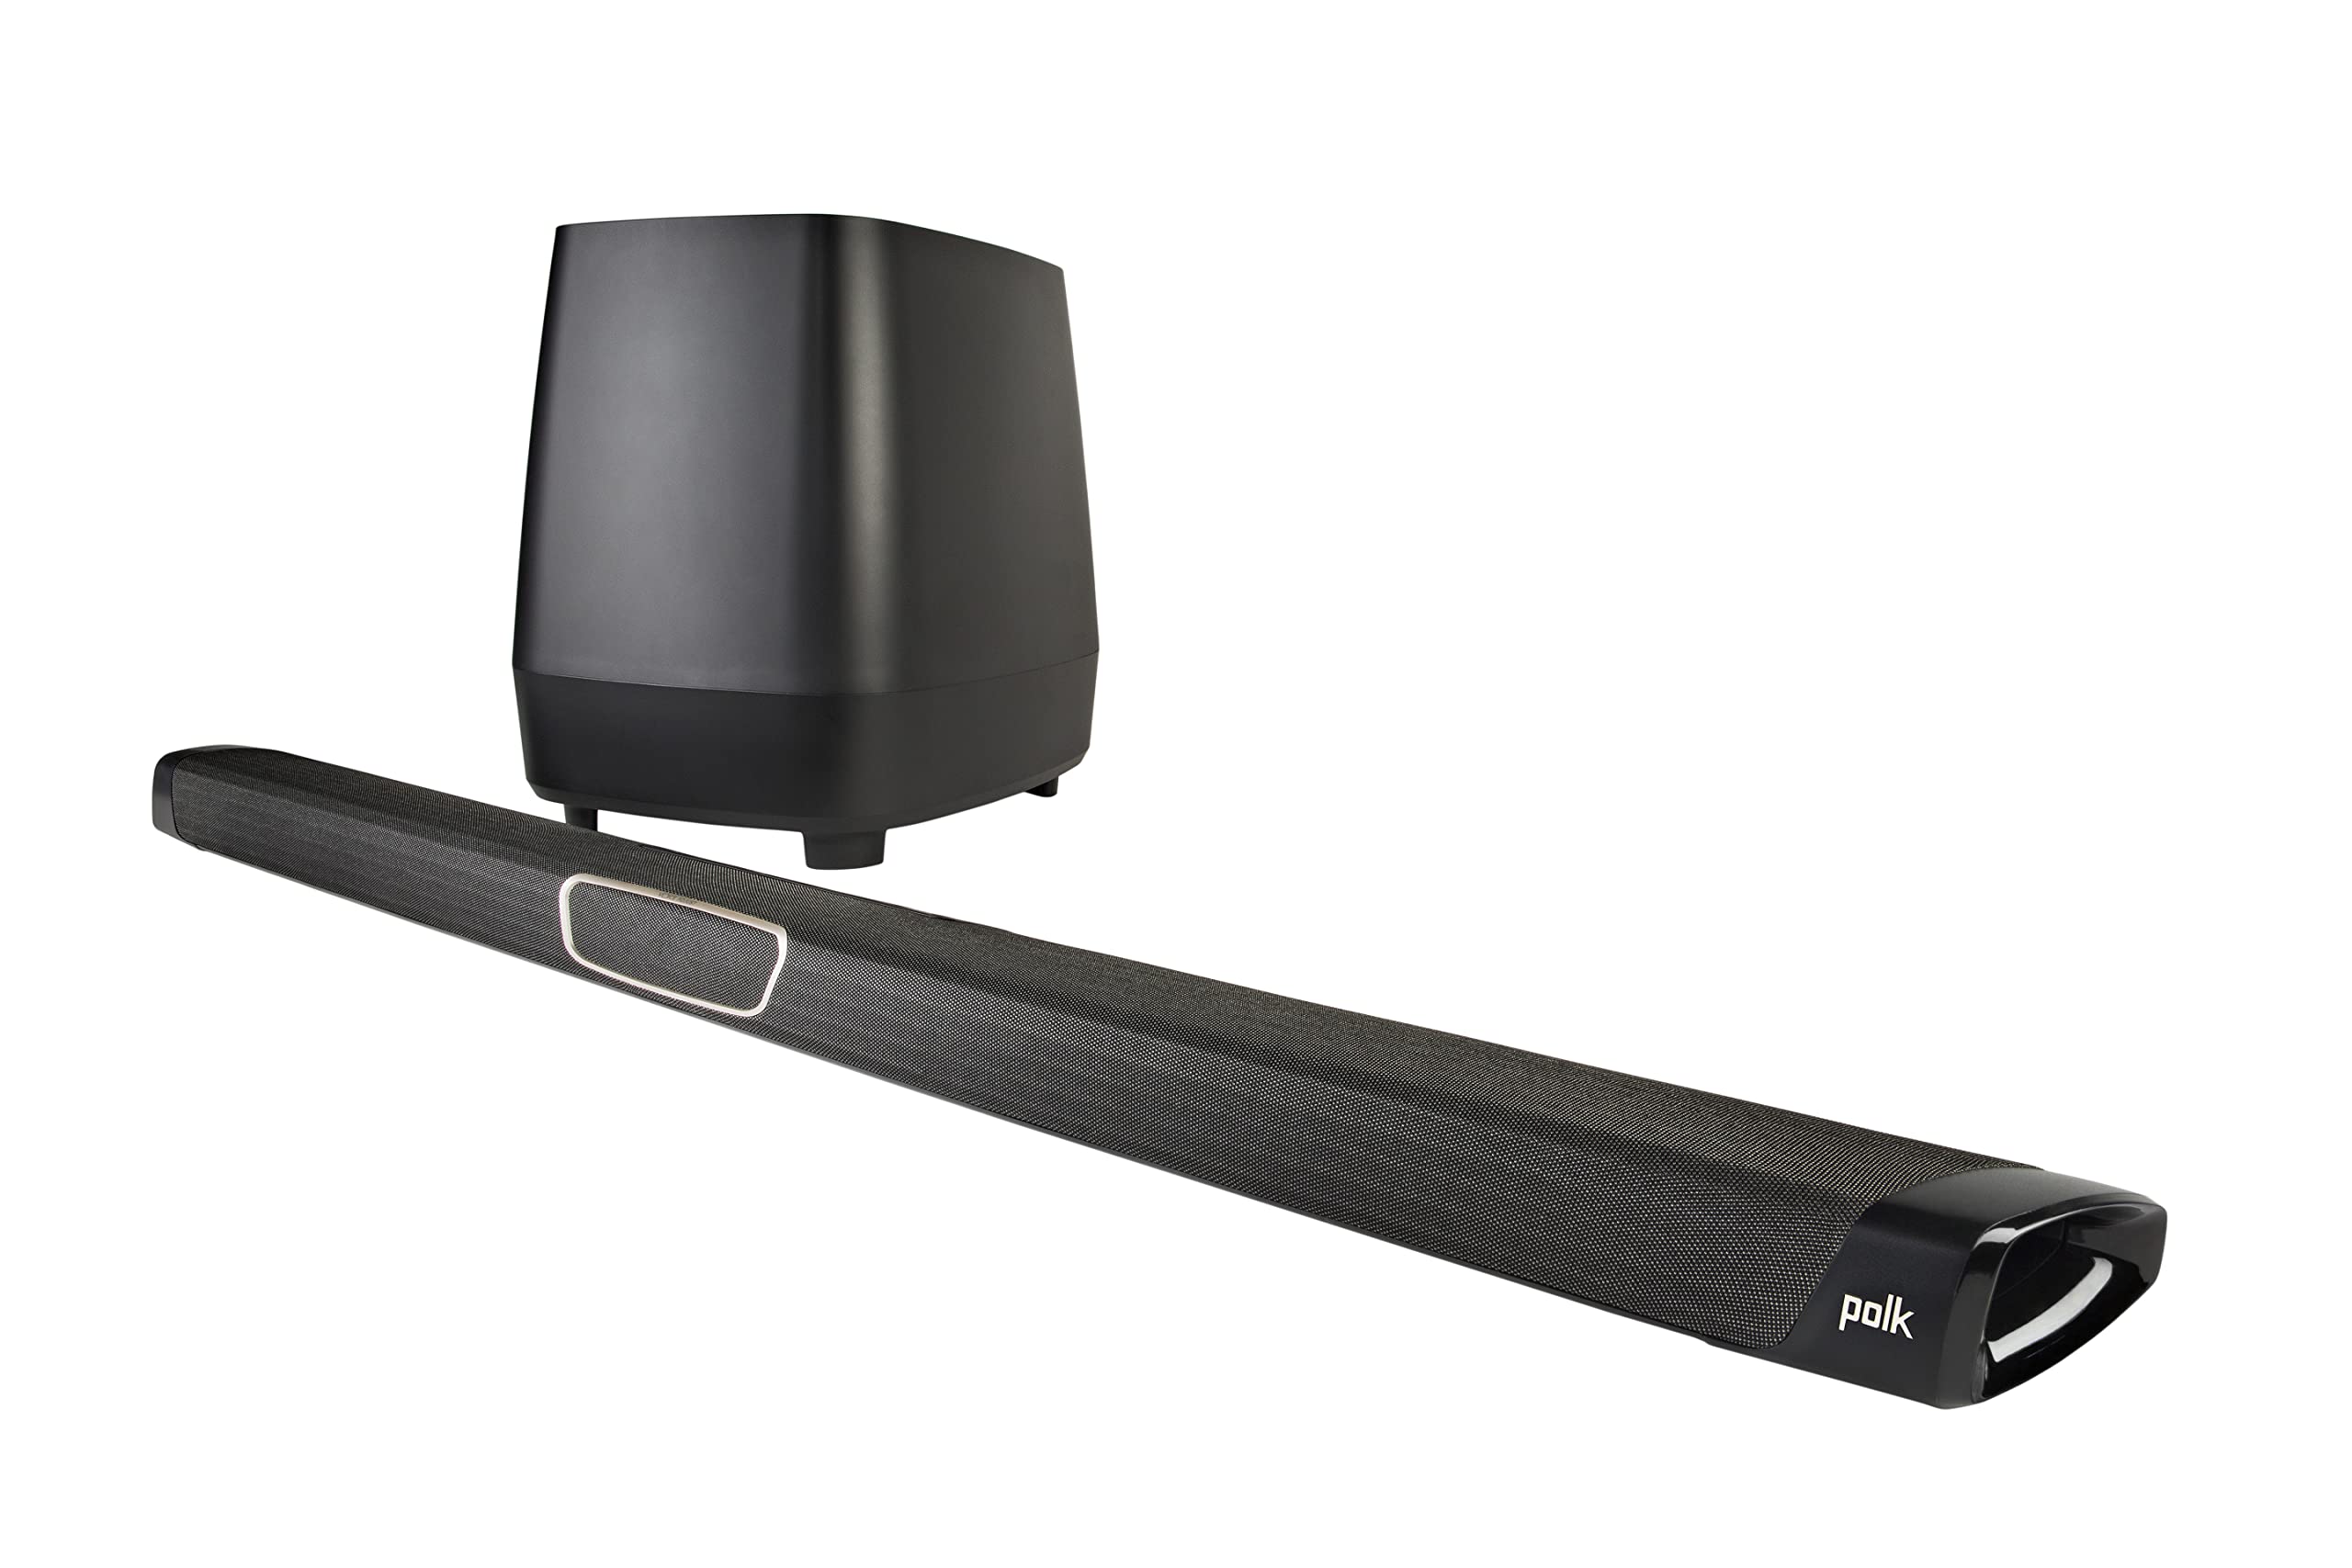 Polk Audio MagniFi Max Home Theater Sound Bar with 5.1 Dolby Digital Experience | Works with 4K & HD TVs | HDMI & Optical Cables, Wireless Subwoofer Included, Black